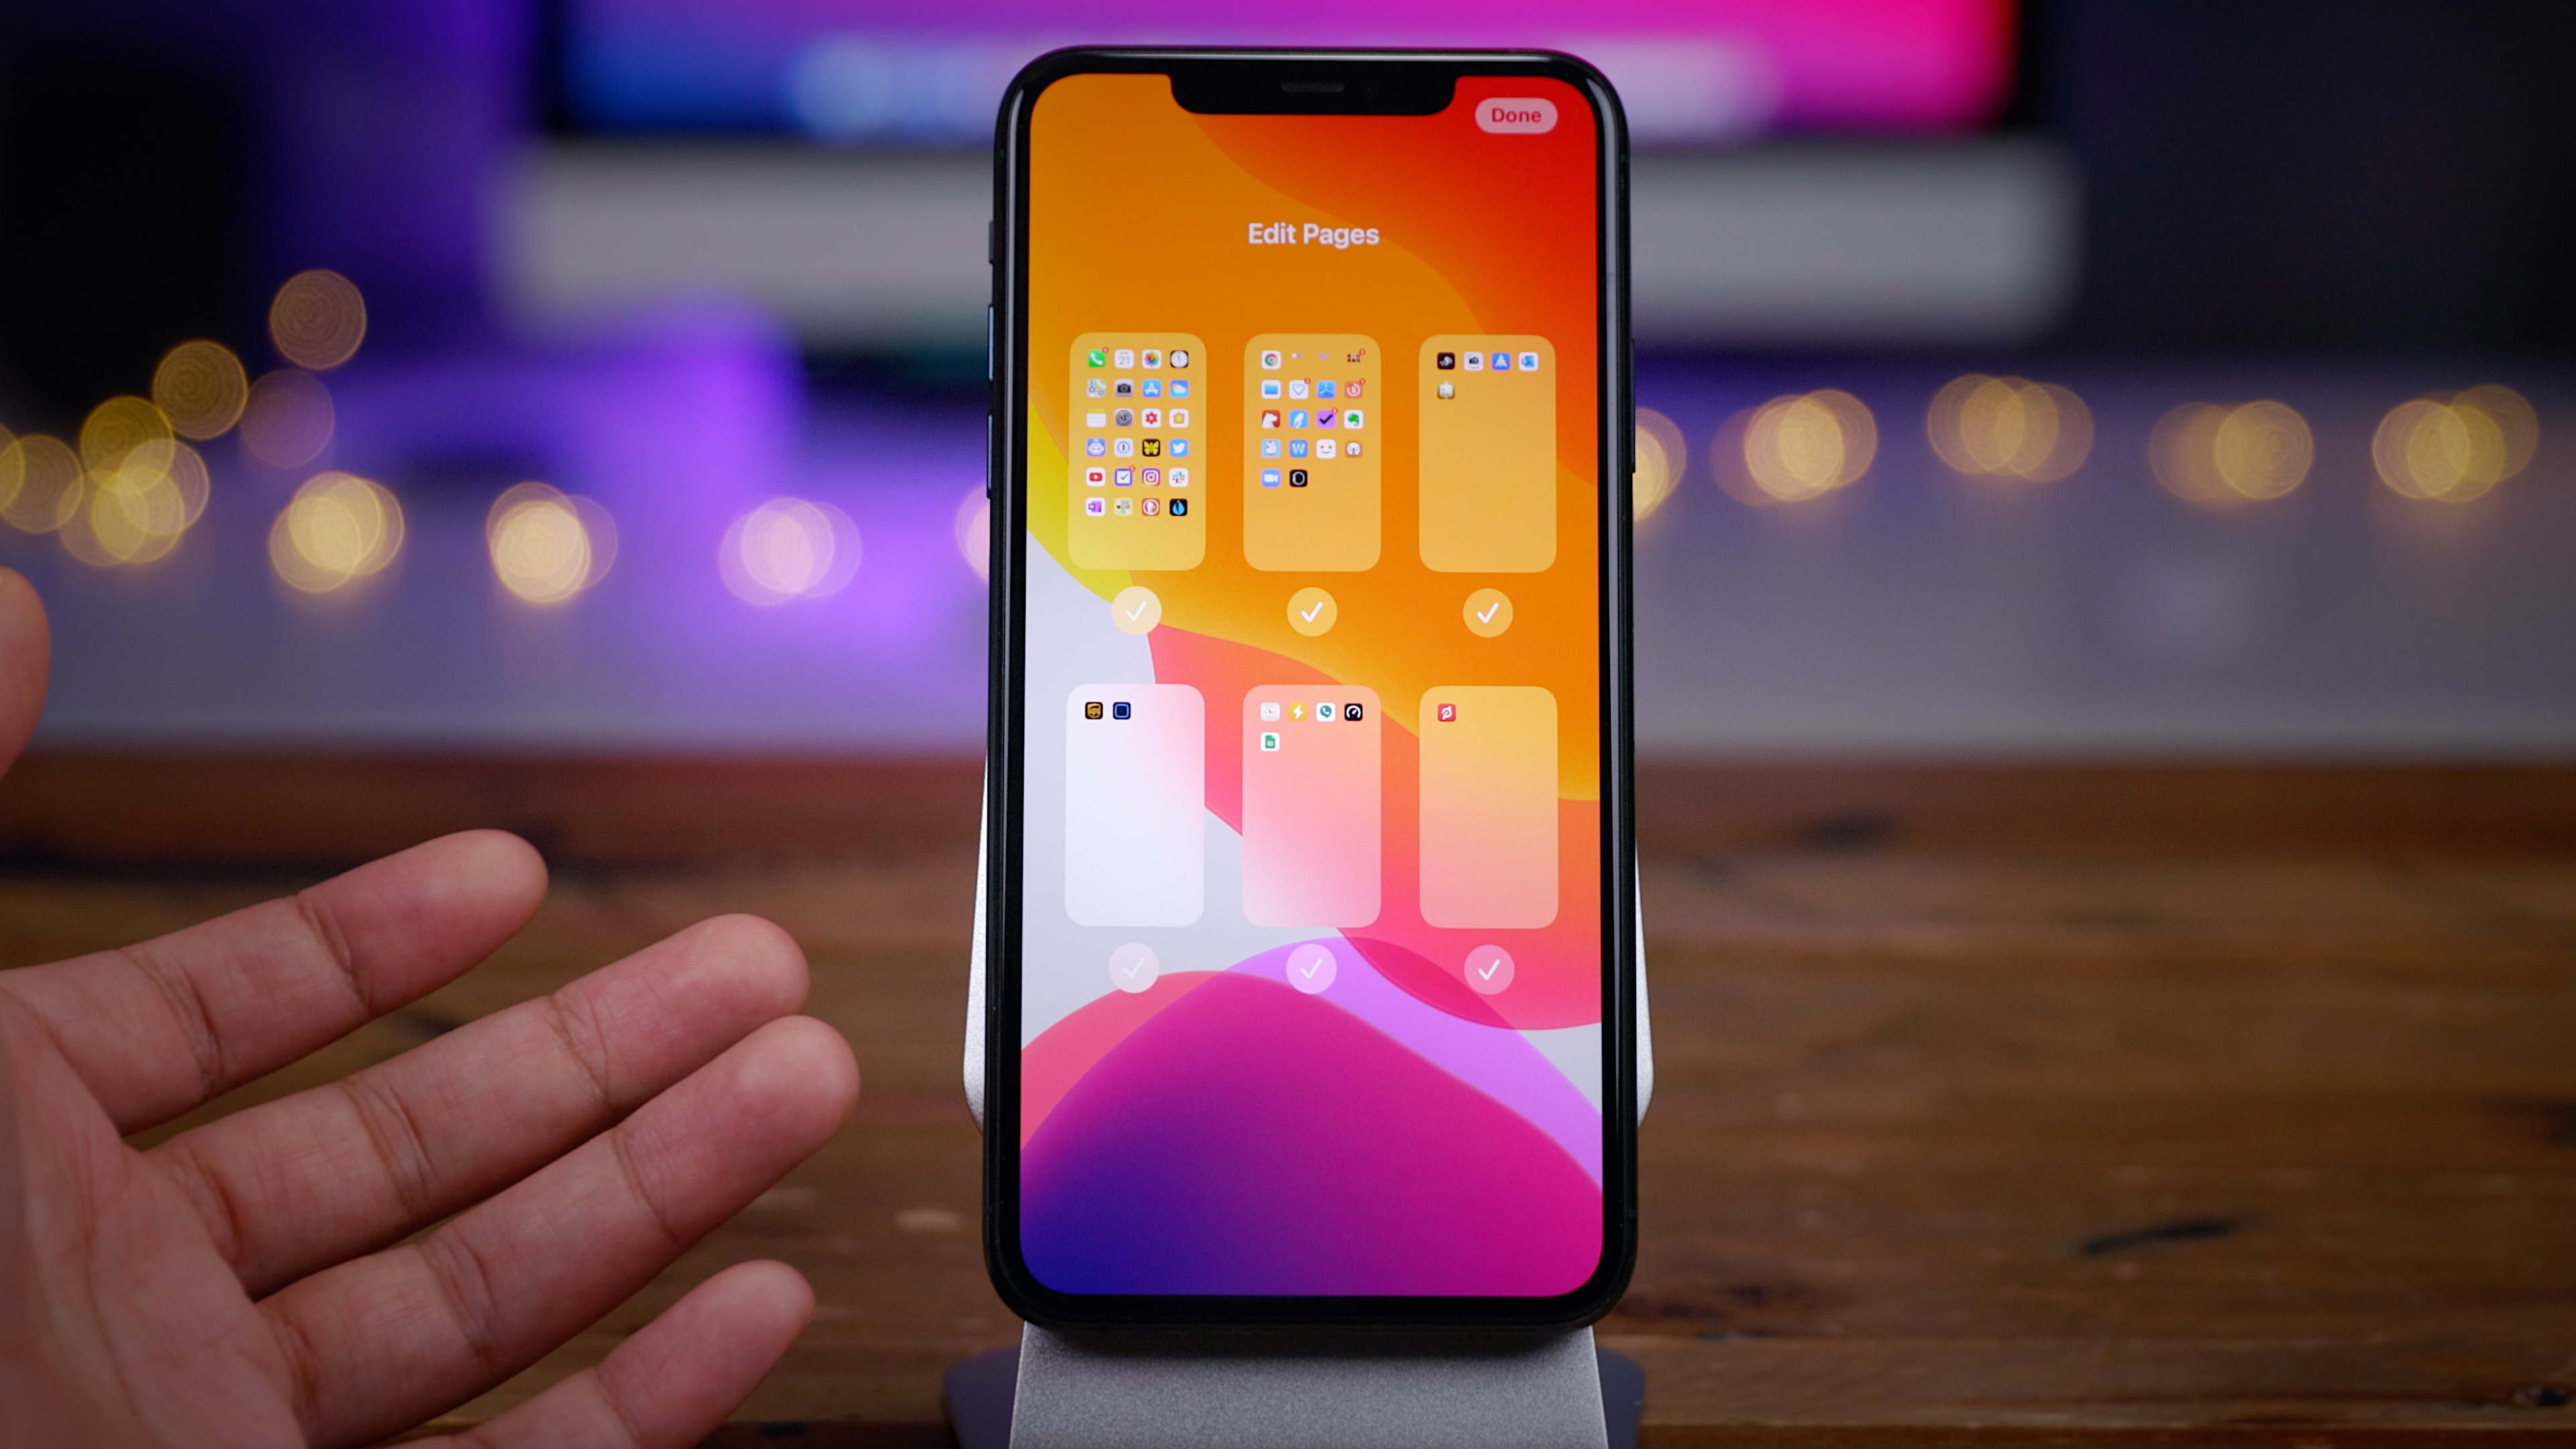 Hands-on with the top 10 iOS 14 features for iPhone [Video] - 9to5Mac